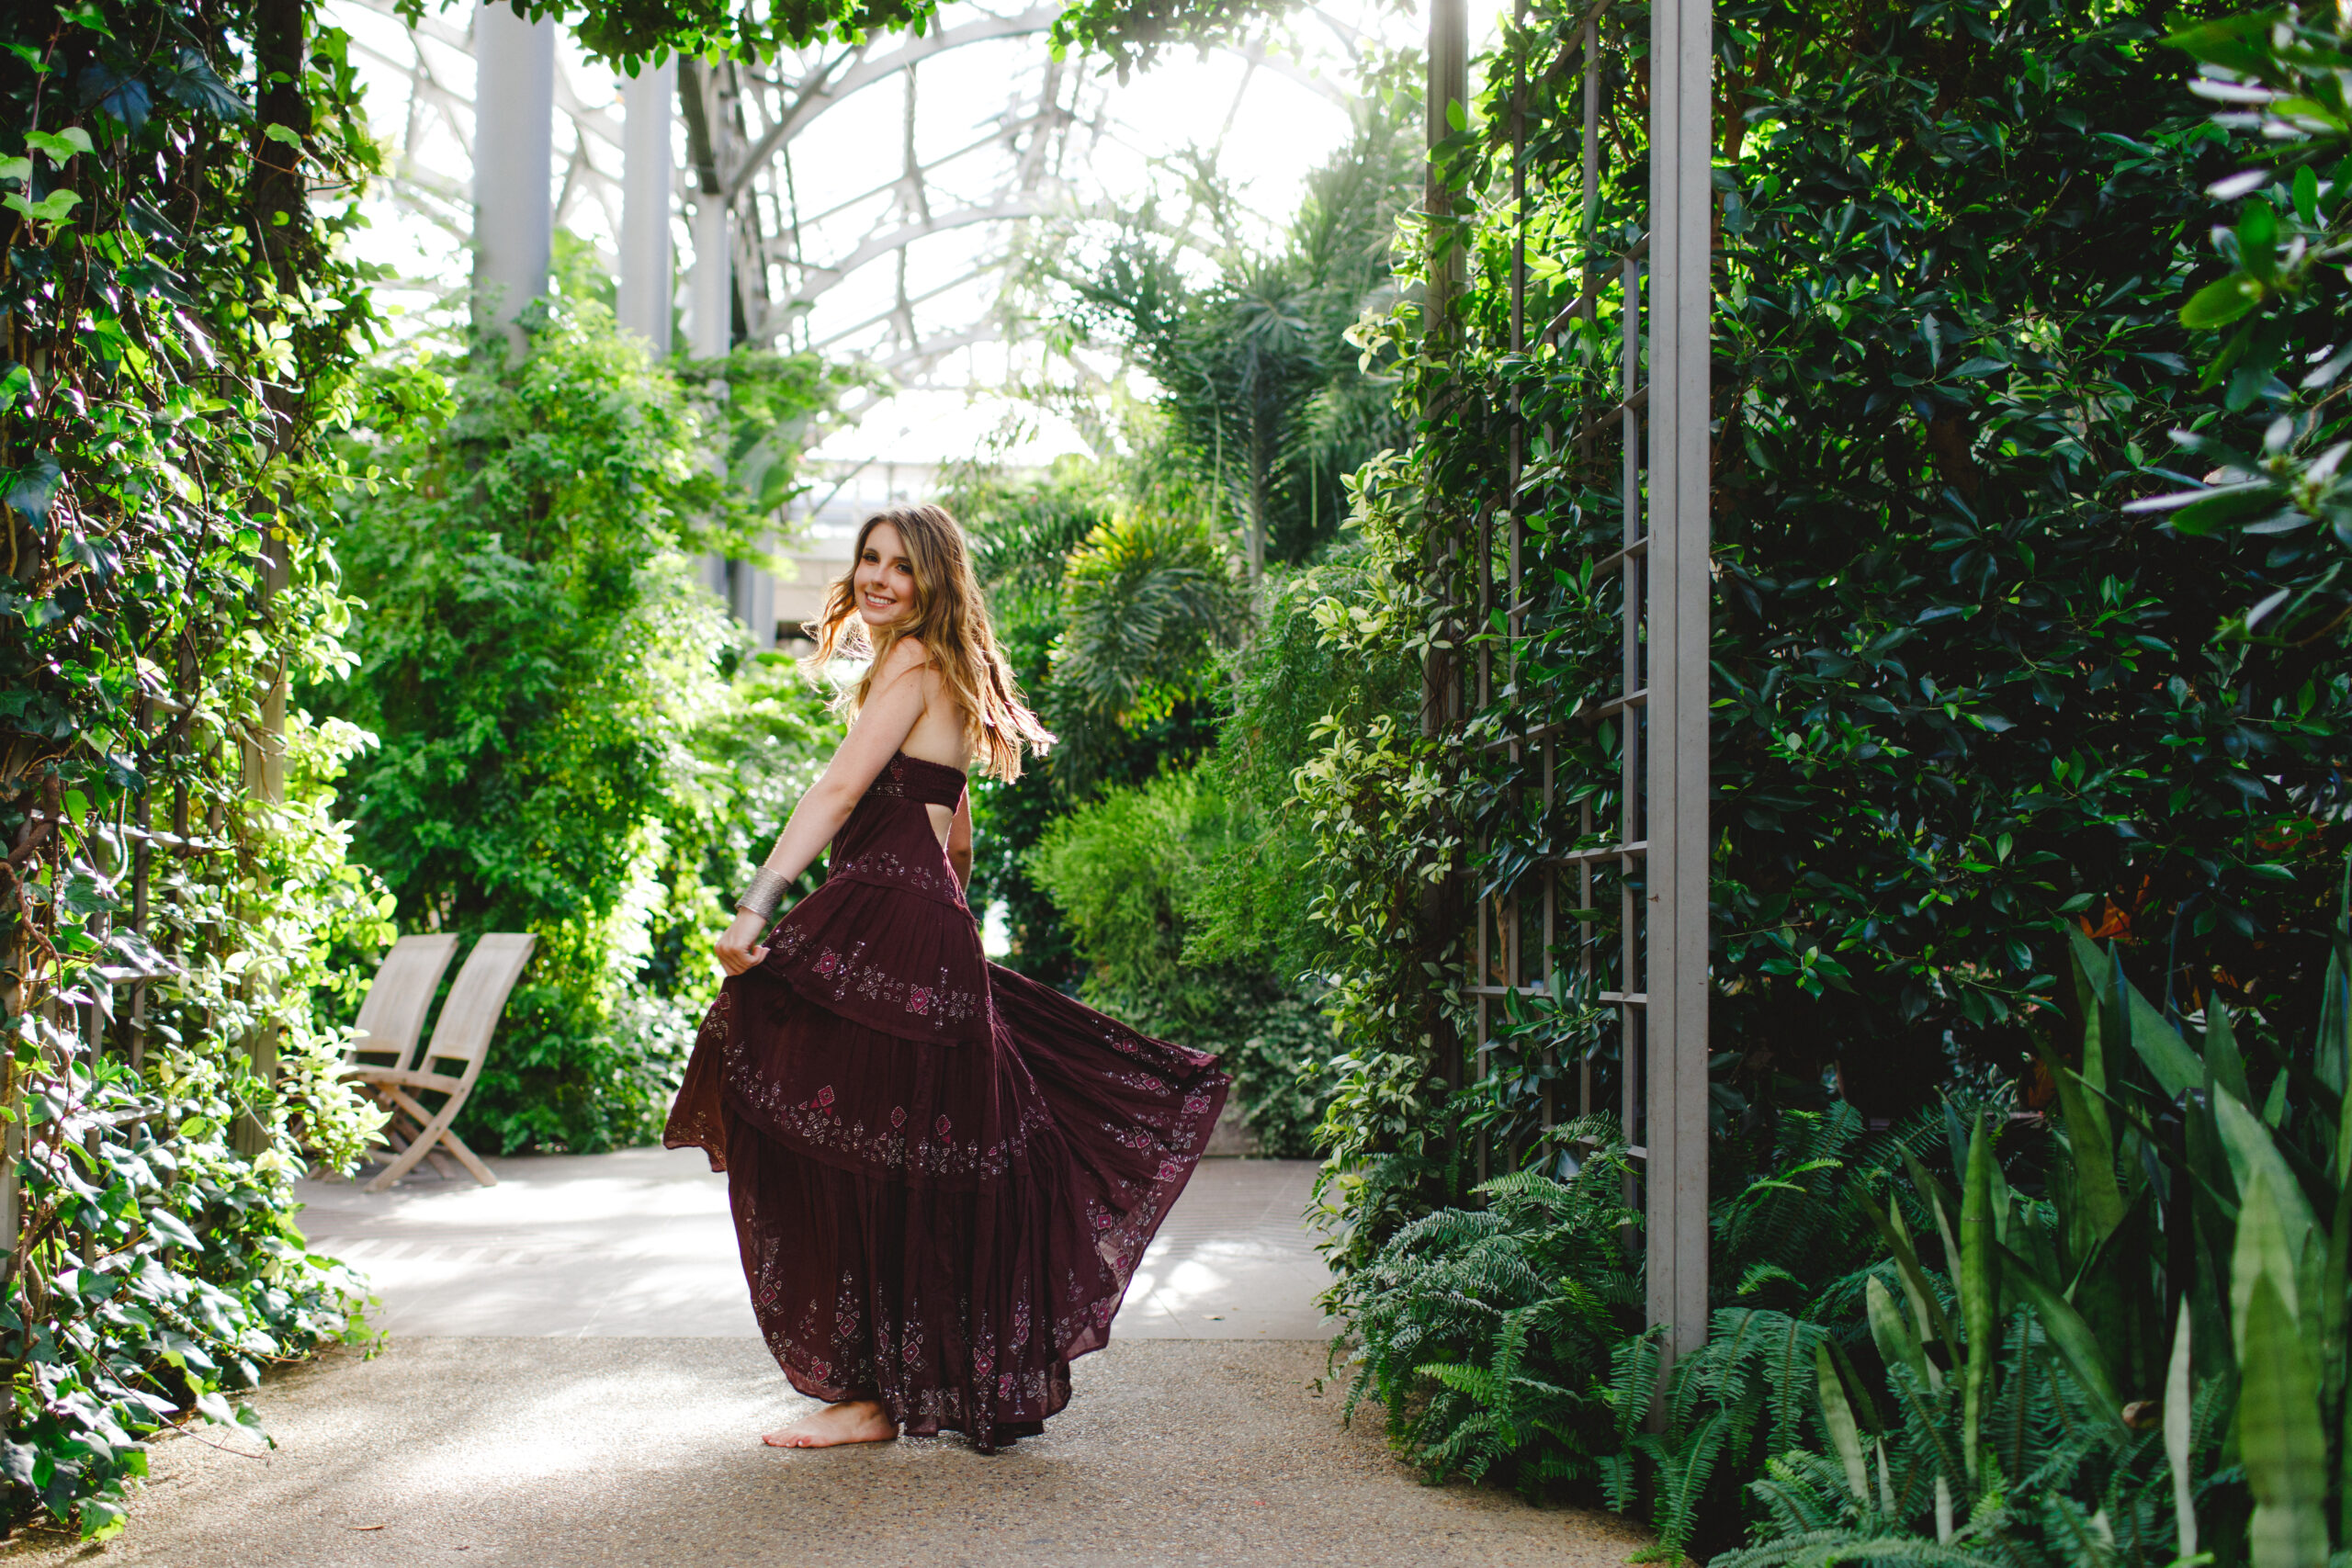 Clare looking over her shoulder as her deep purple beaded dress floats with the breeze in the greenhouse at Longwood gardens.